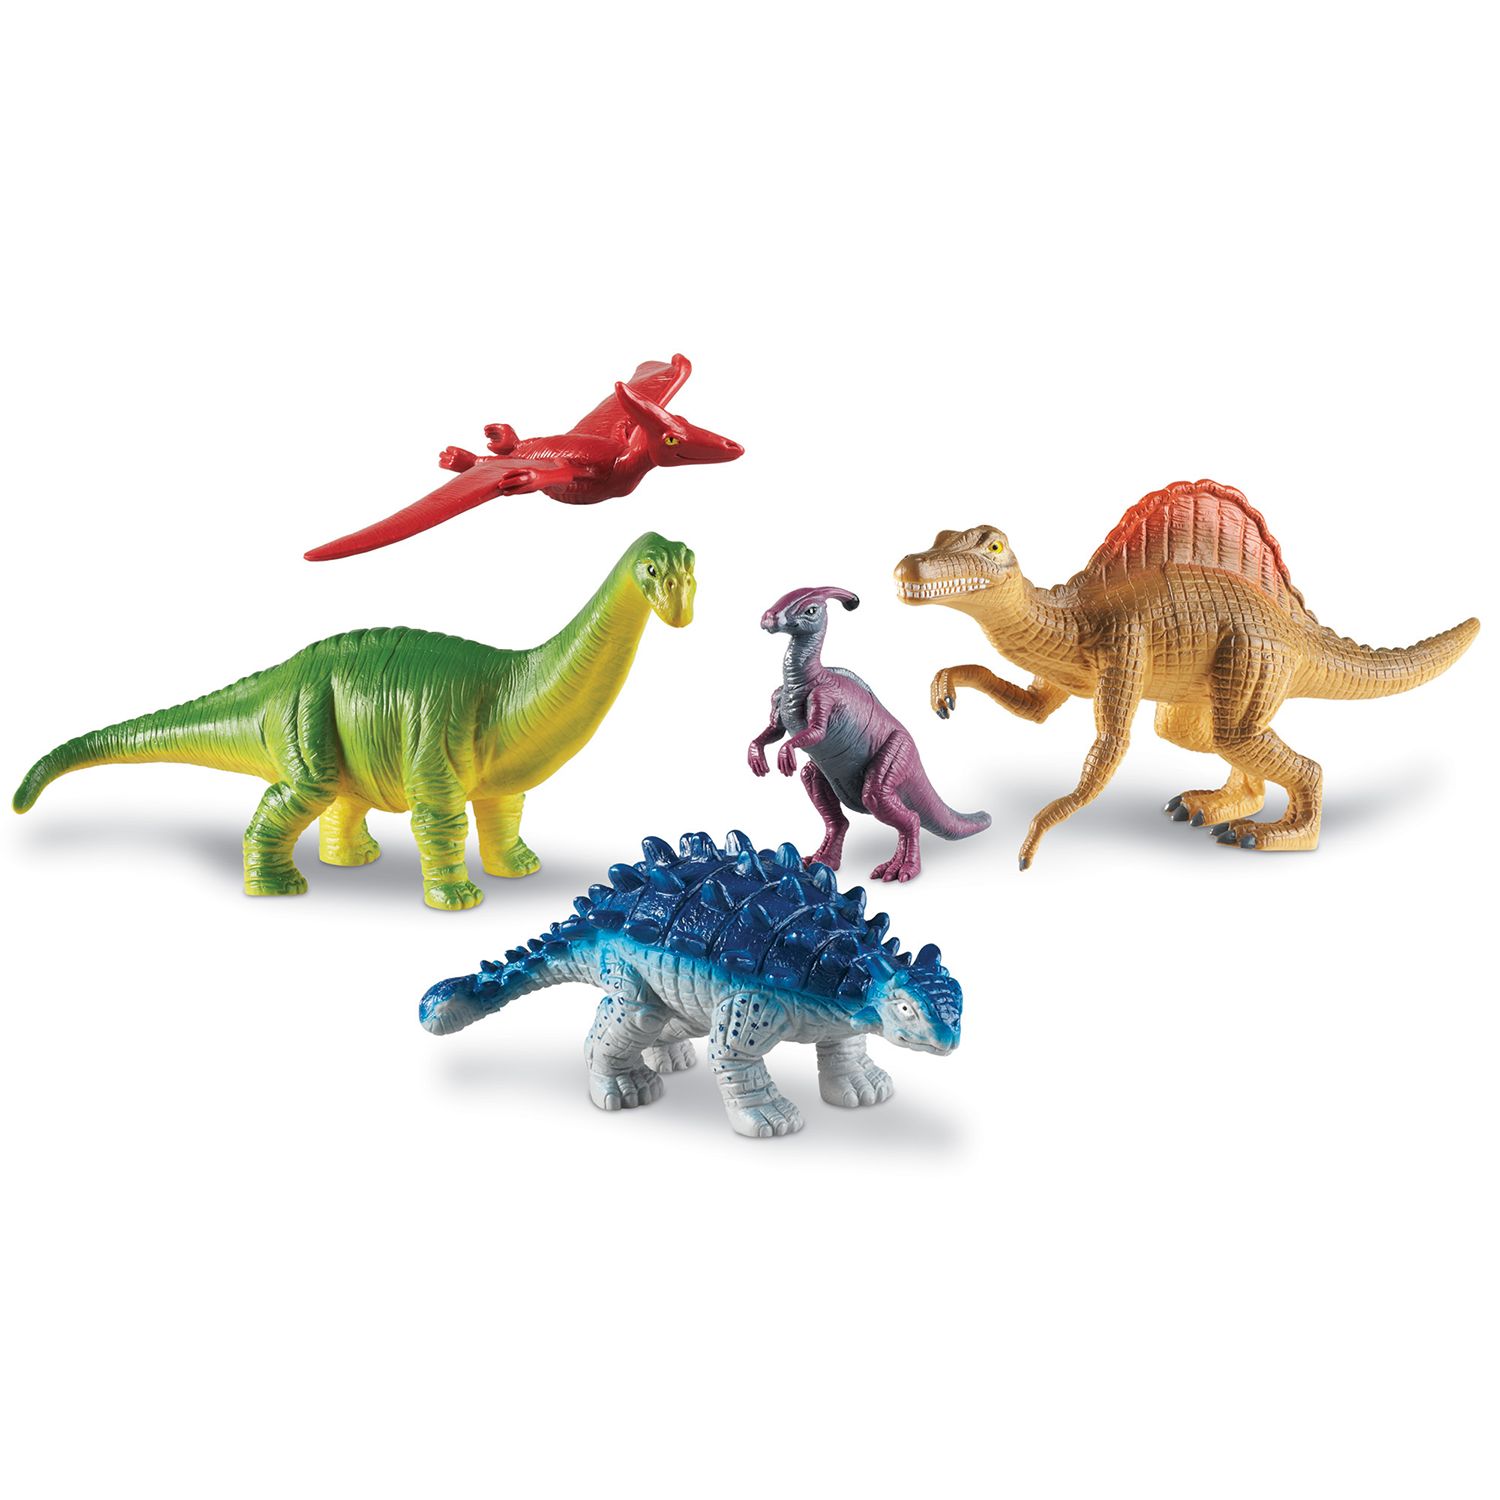 Image for Learning Resources Jumbo Dinosaurs at Kohl's.